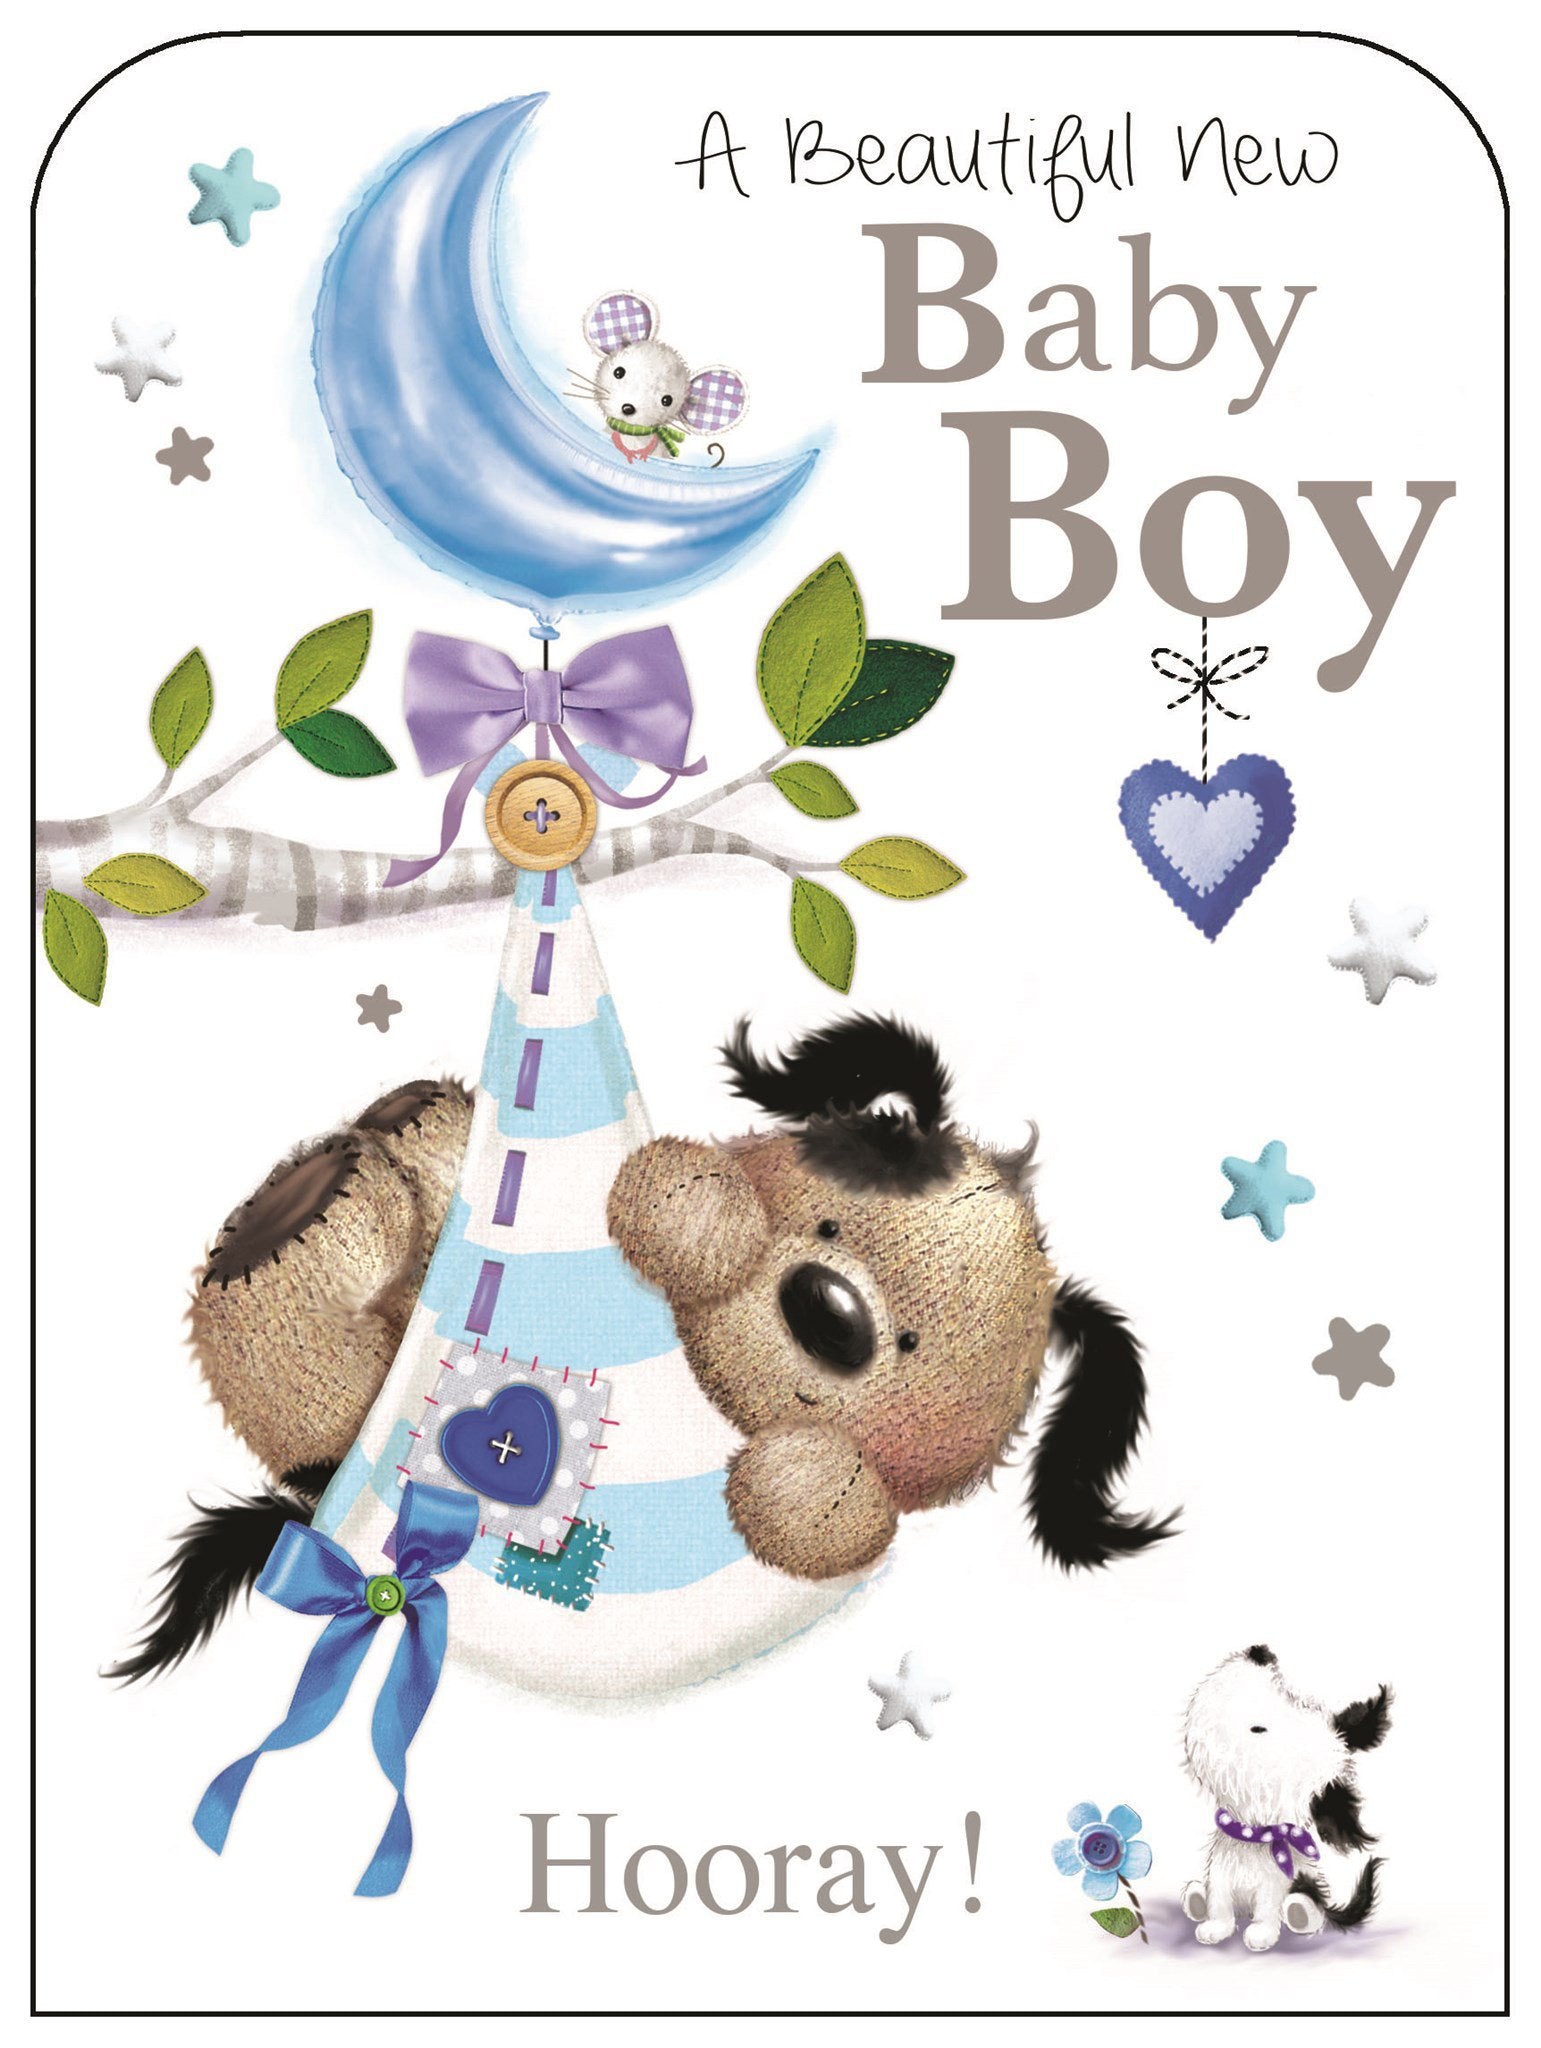 Front of New Baby Boy Cute Greetings Card